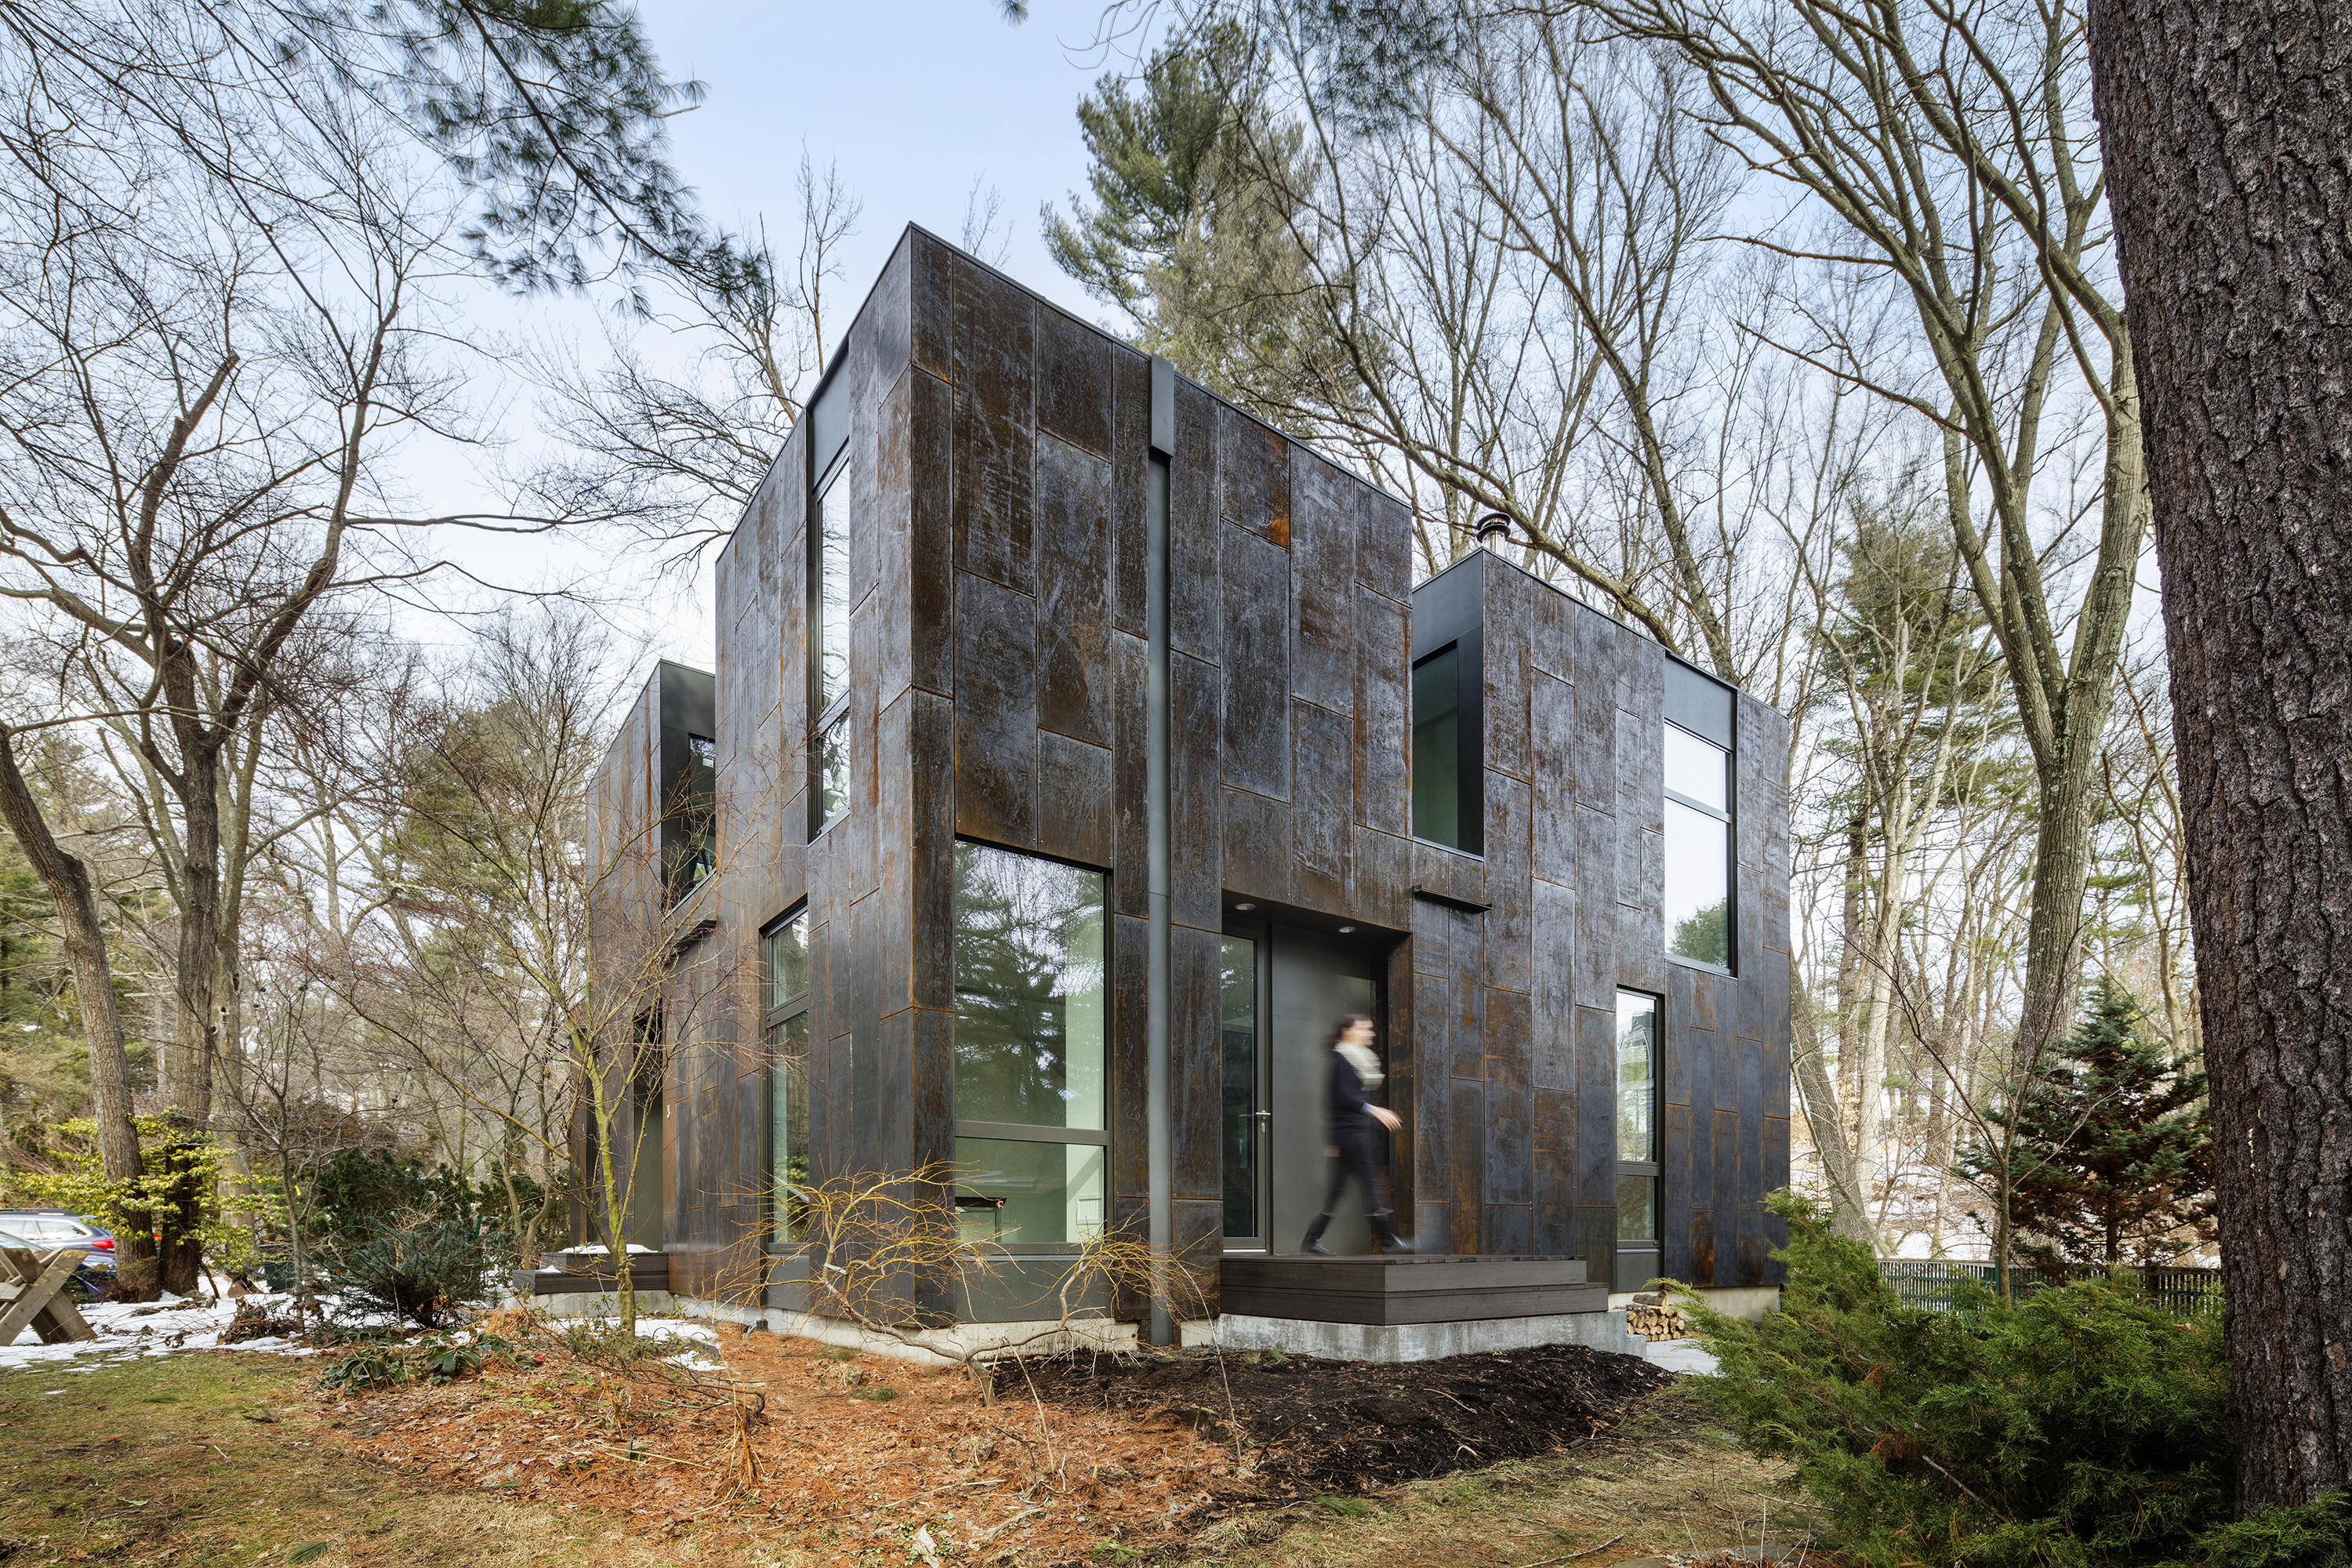 Think Inside The Box 8 Innovative Homes Designed With Square Plans Architizer Journal